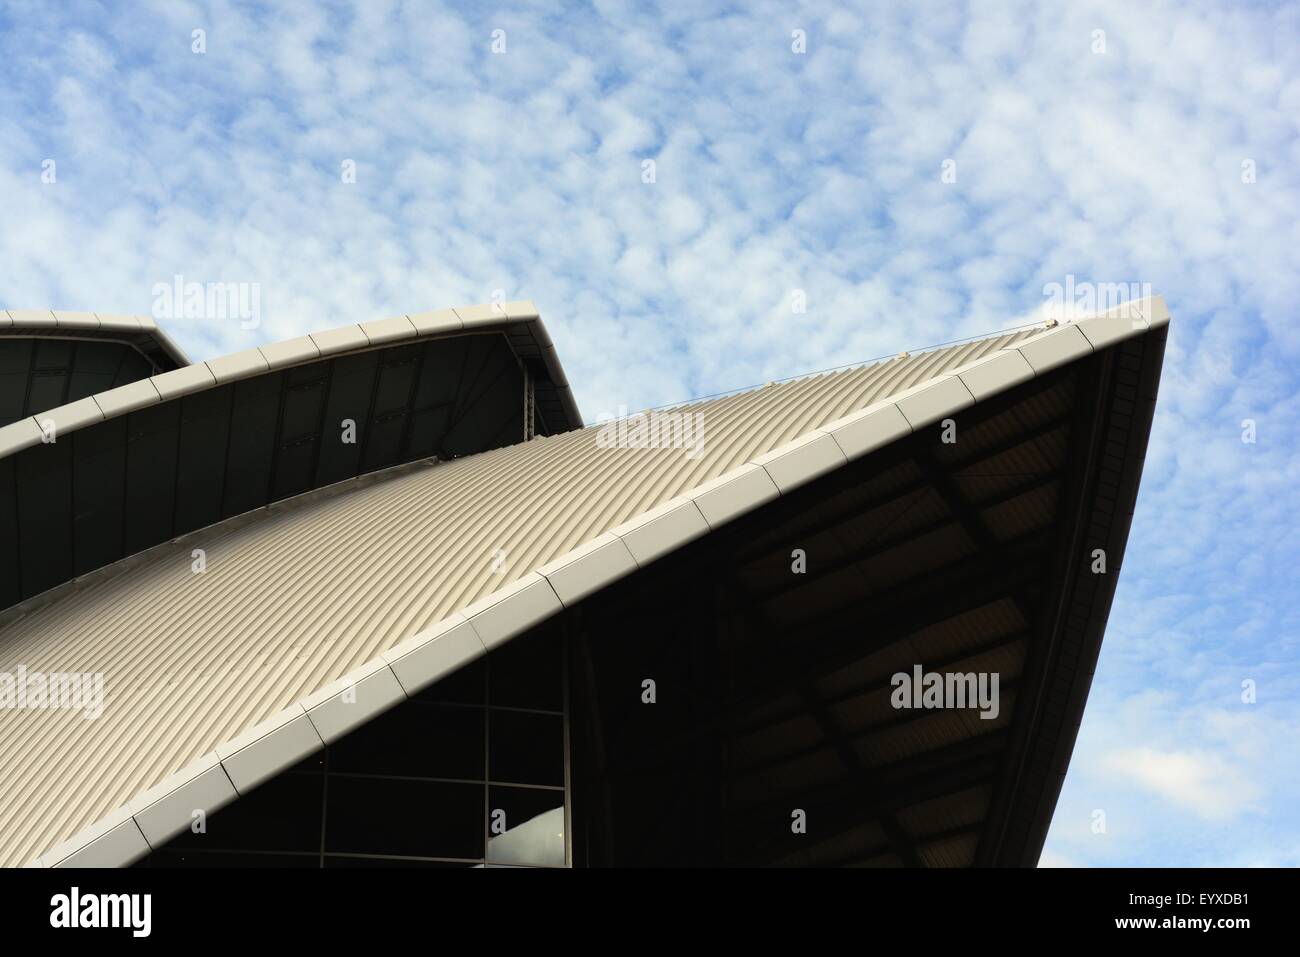 Acute angles in the roof design of the Clyde Auditorium (The Armadillo), Glasgow Stock Photo